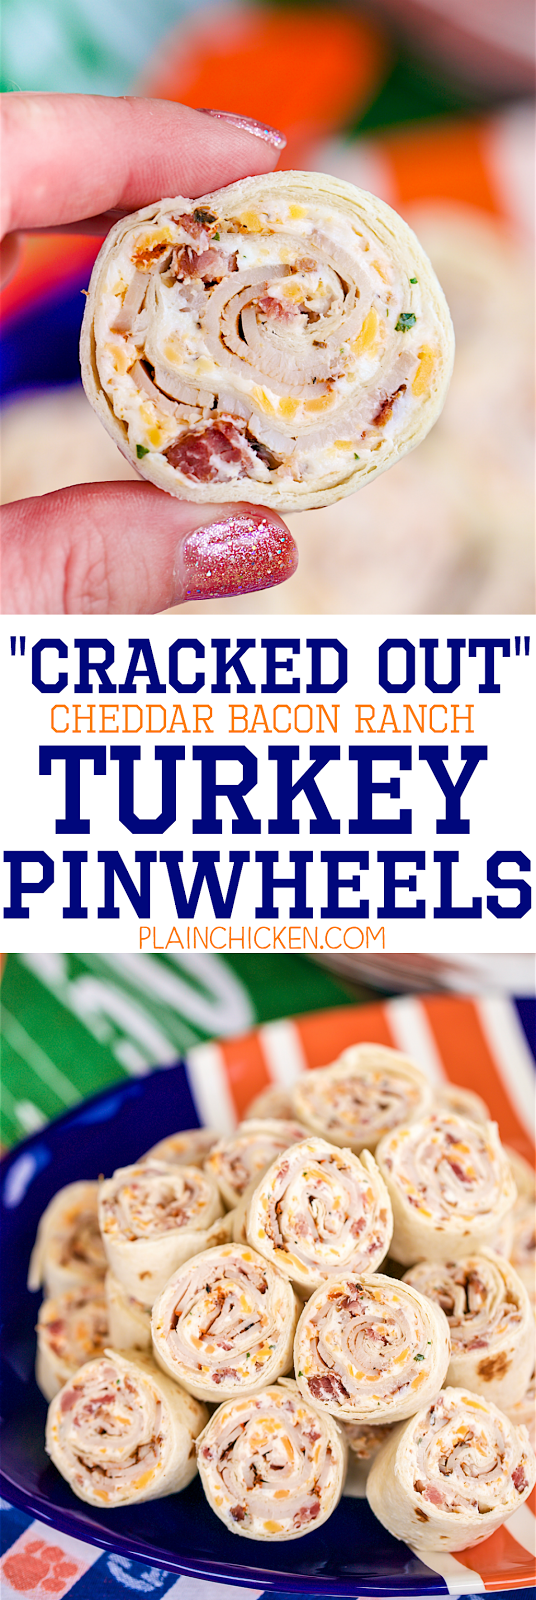 Cracked Out Turkey Pinwheels – I am ADDICTED to these sandwiches! Cream cheese, cheddar, bacon, Ranch and turkey wrapped in a